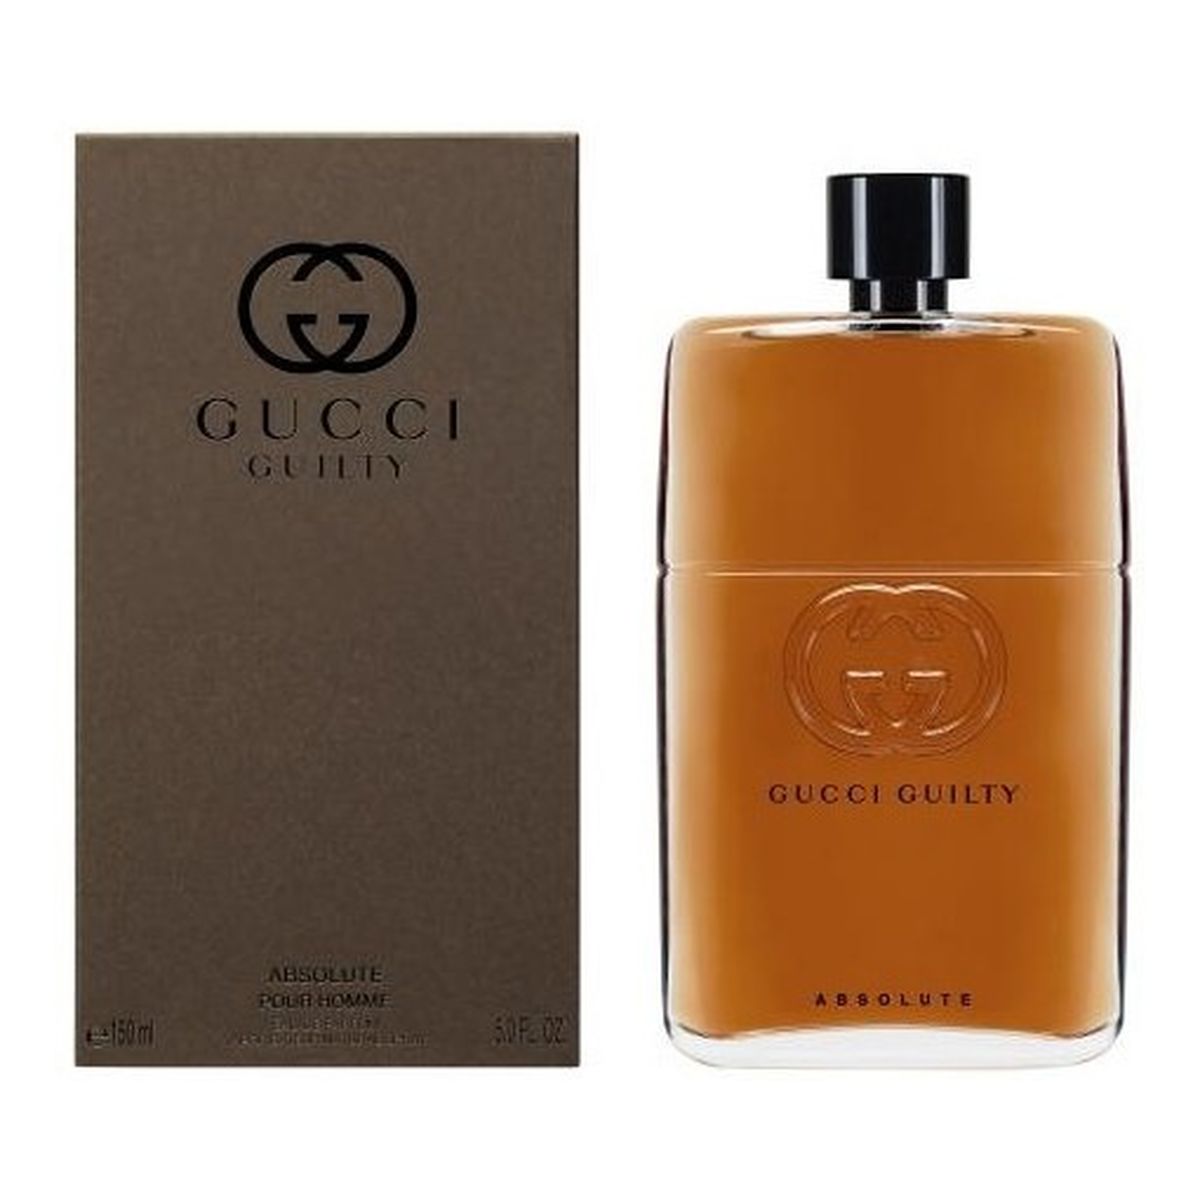 Gucci Guilty Absolute Pour Homme woda perfumowana 150ml